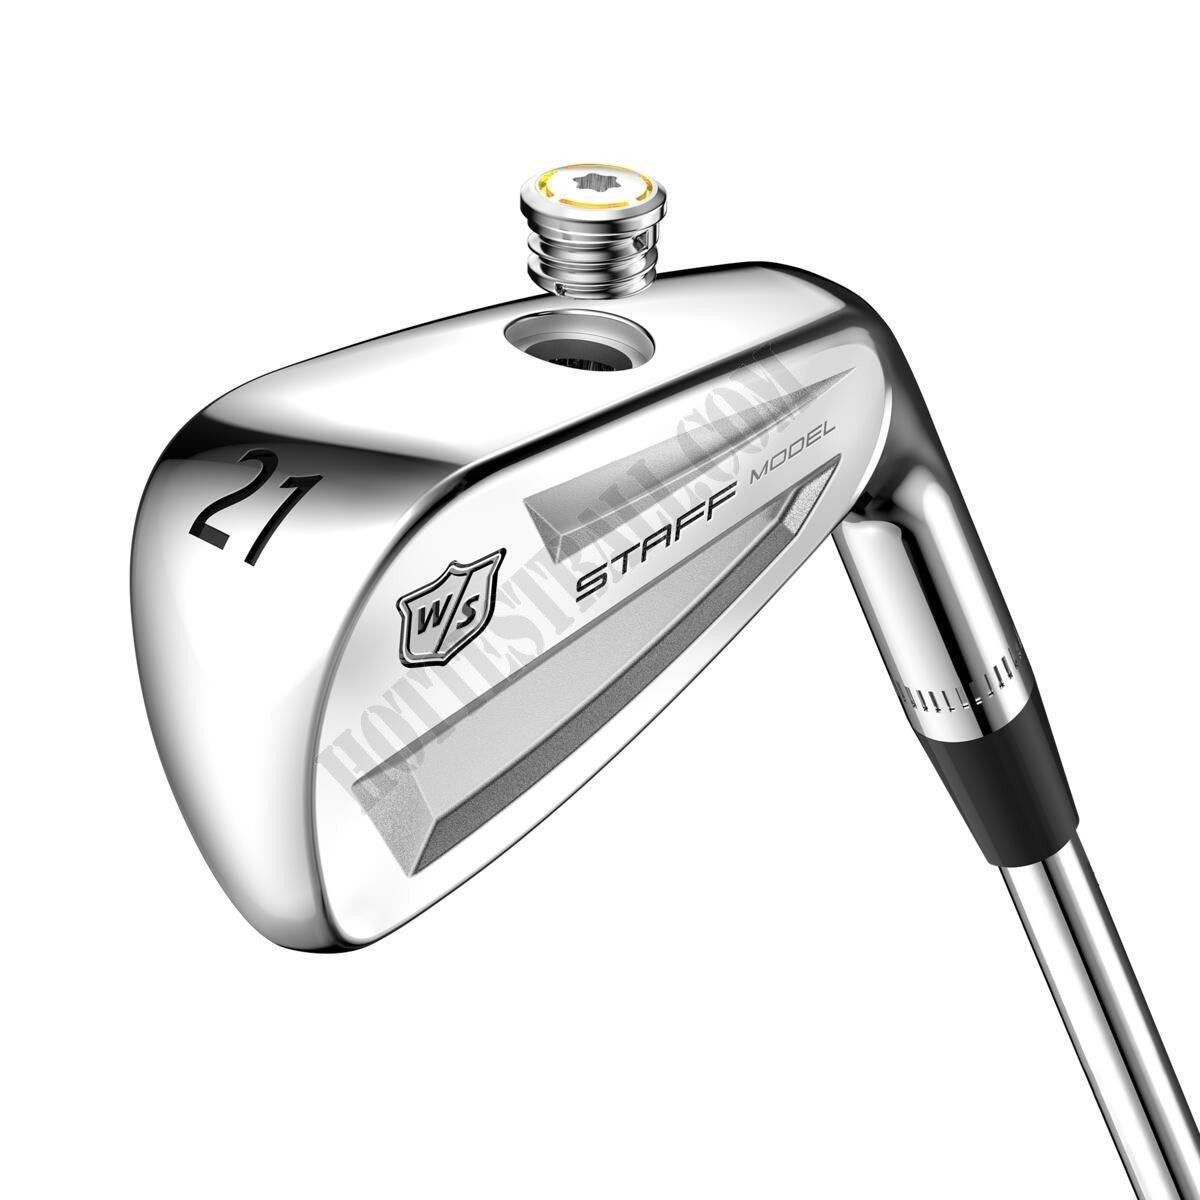 Staff Model Utility Irons - Wilson Discount Store - -4